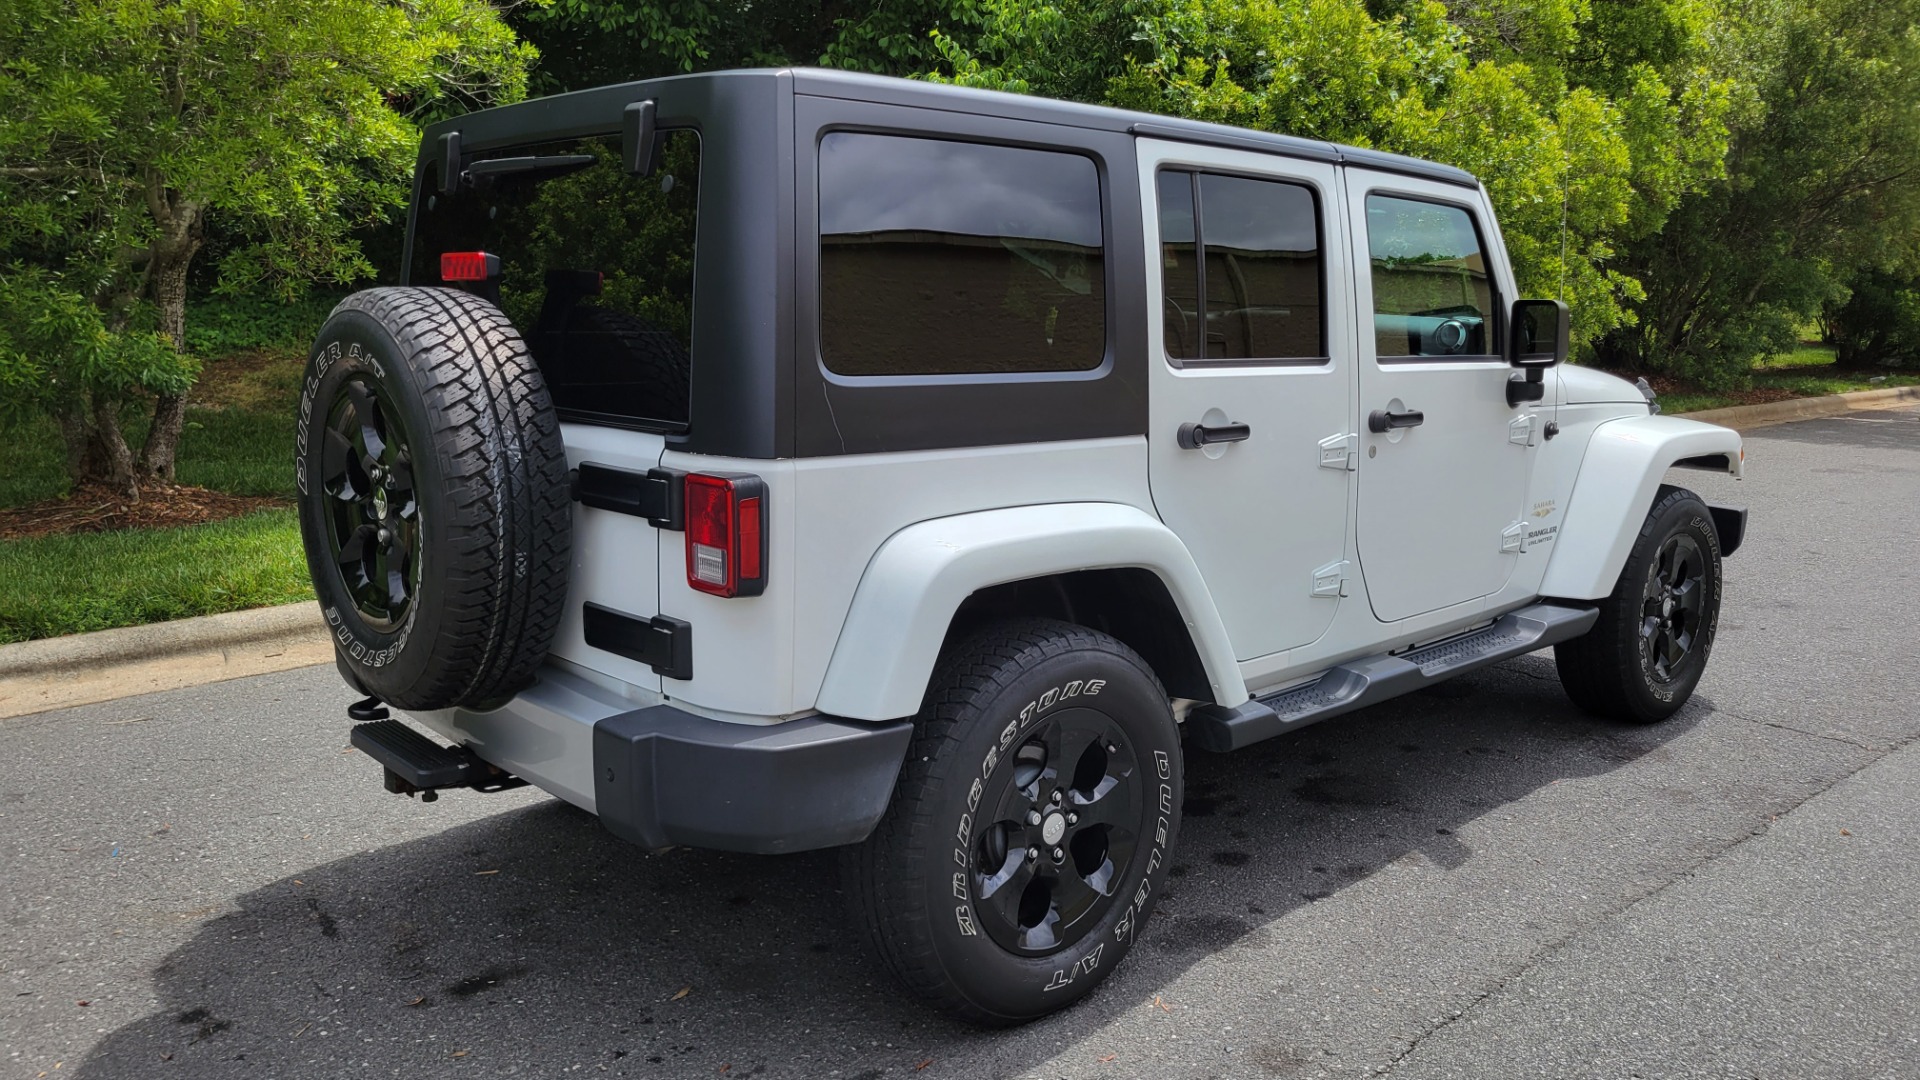 Used 2015 Jeep WRANGLER UNLIMITED SAHARA 4X4 / 3.6L / AUTO / 3-PC HARD-TOP / NAVIGATION for sale $33,995 at Formula Imports in Charlotte NC 28227 4